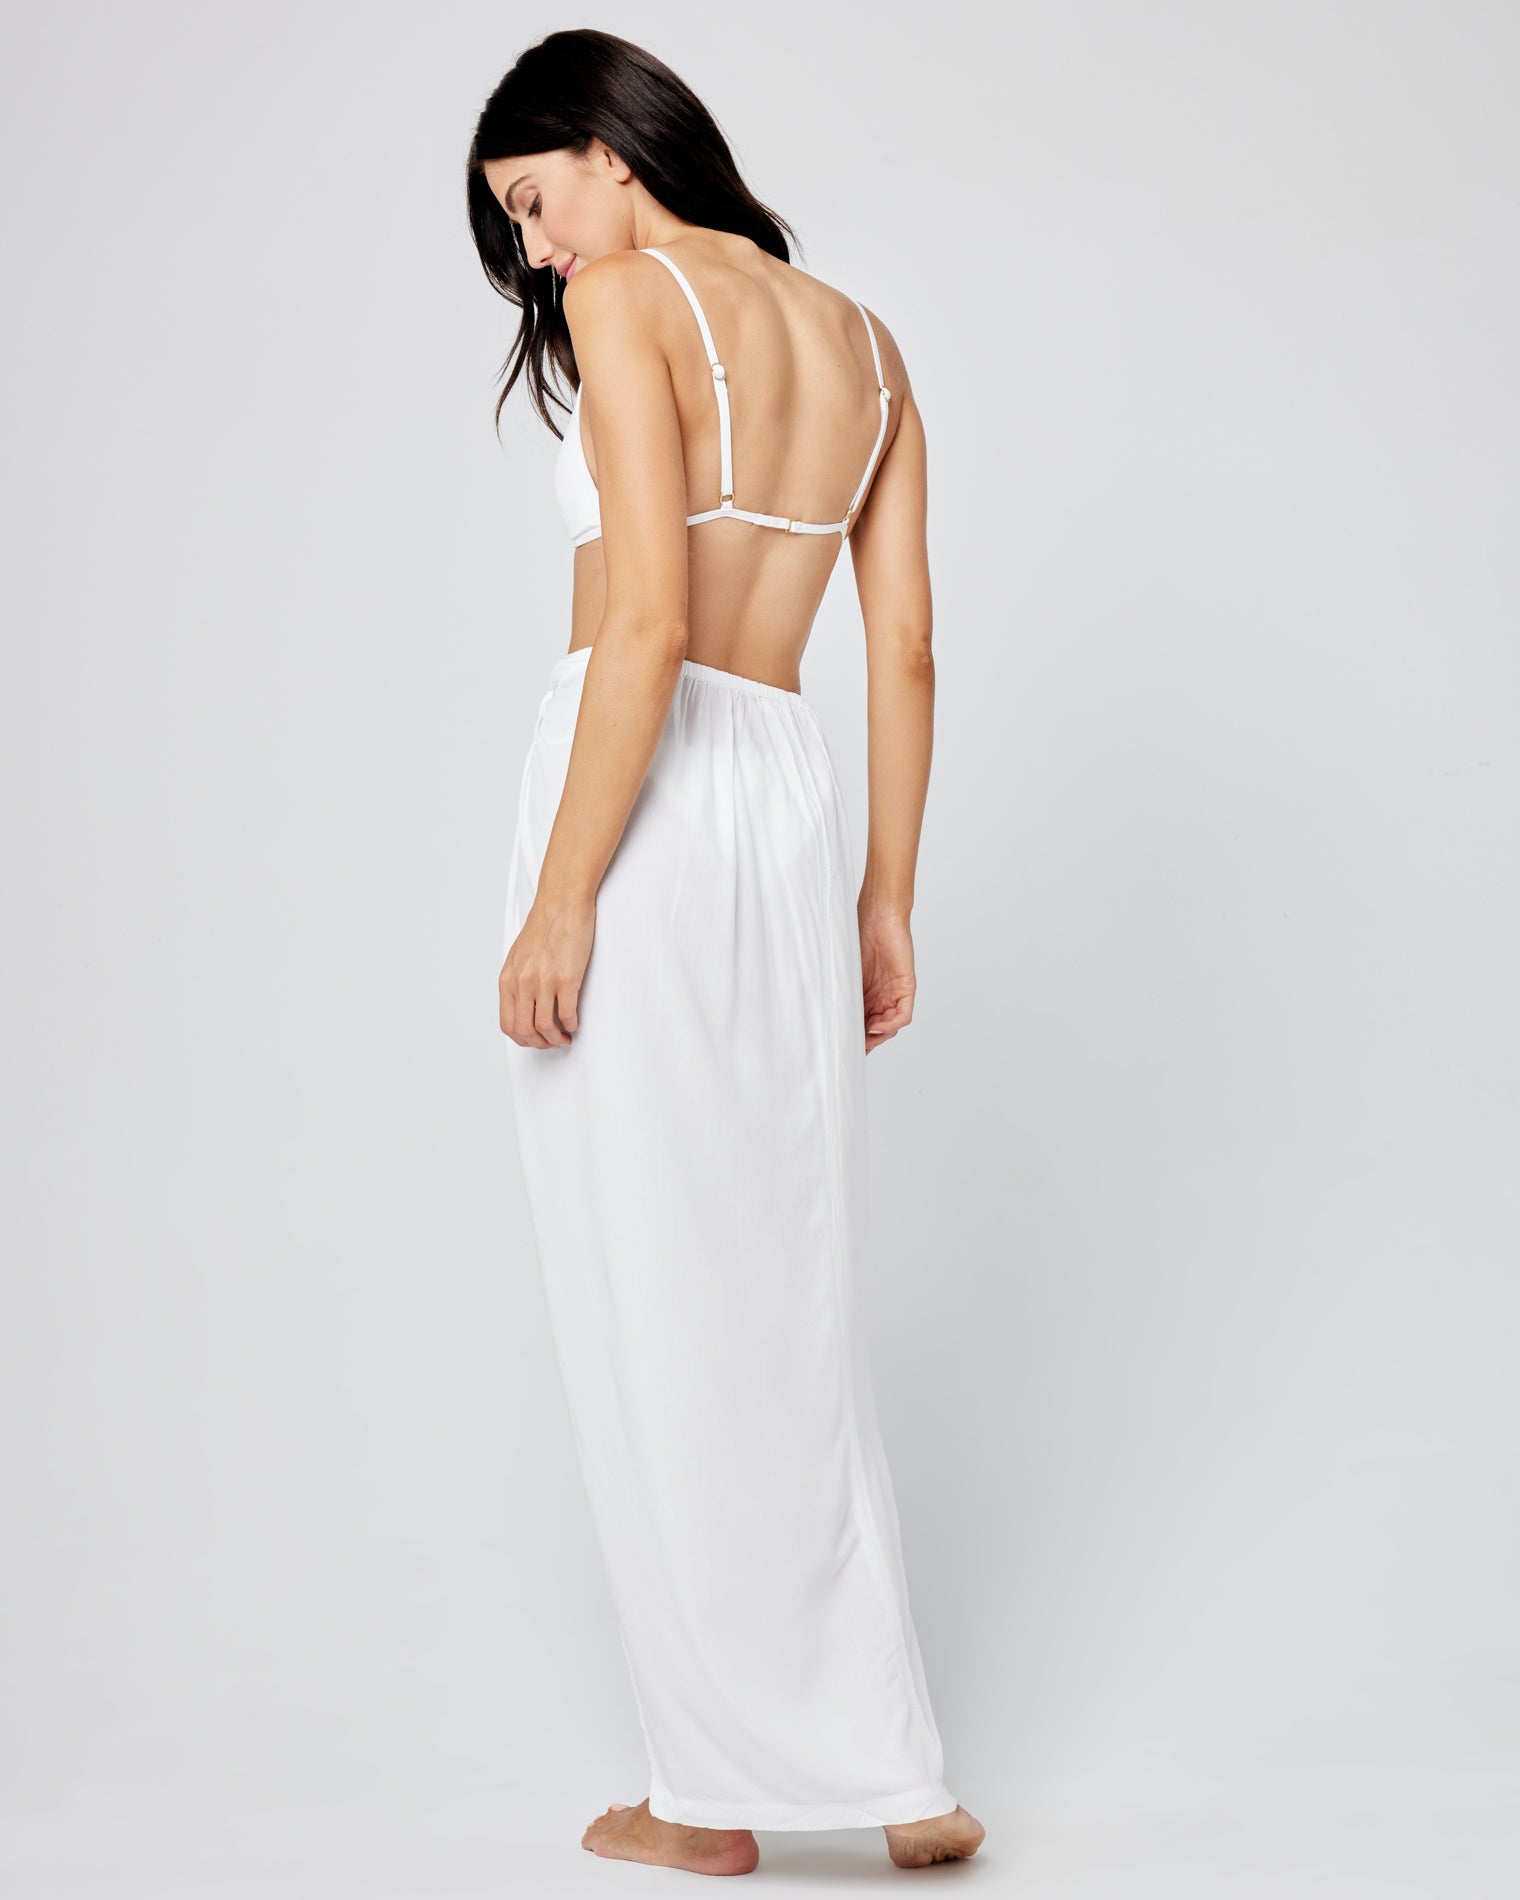 L*Space Mia Cover-Up Sarong